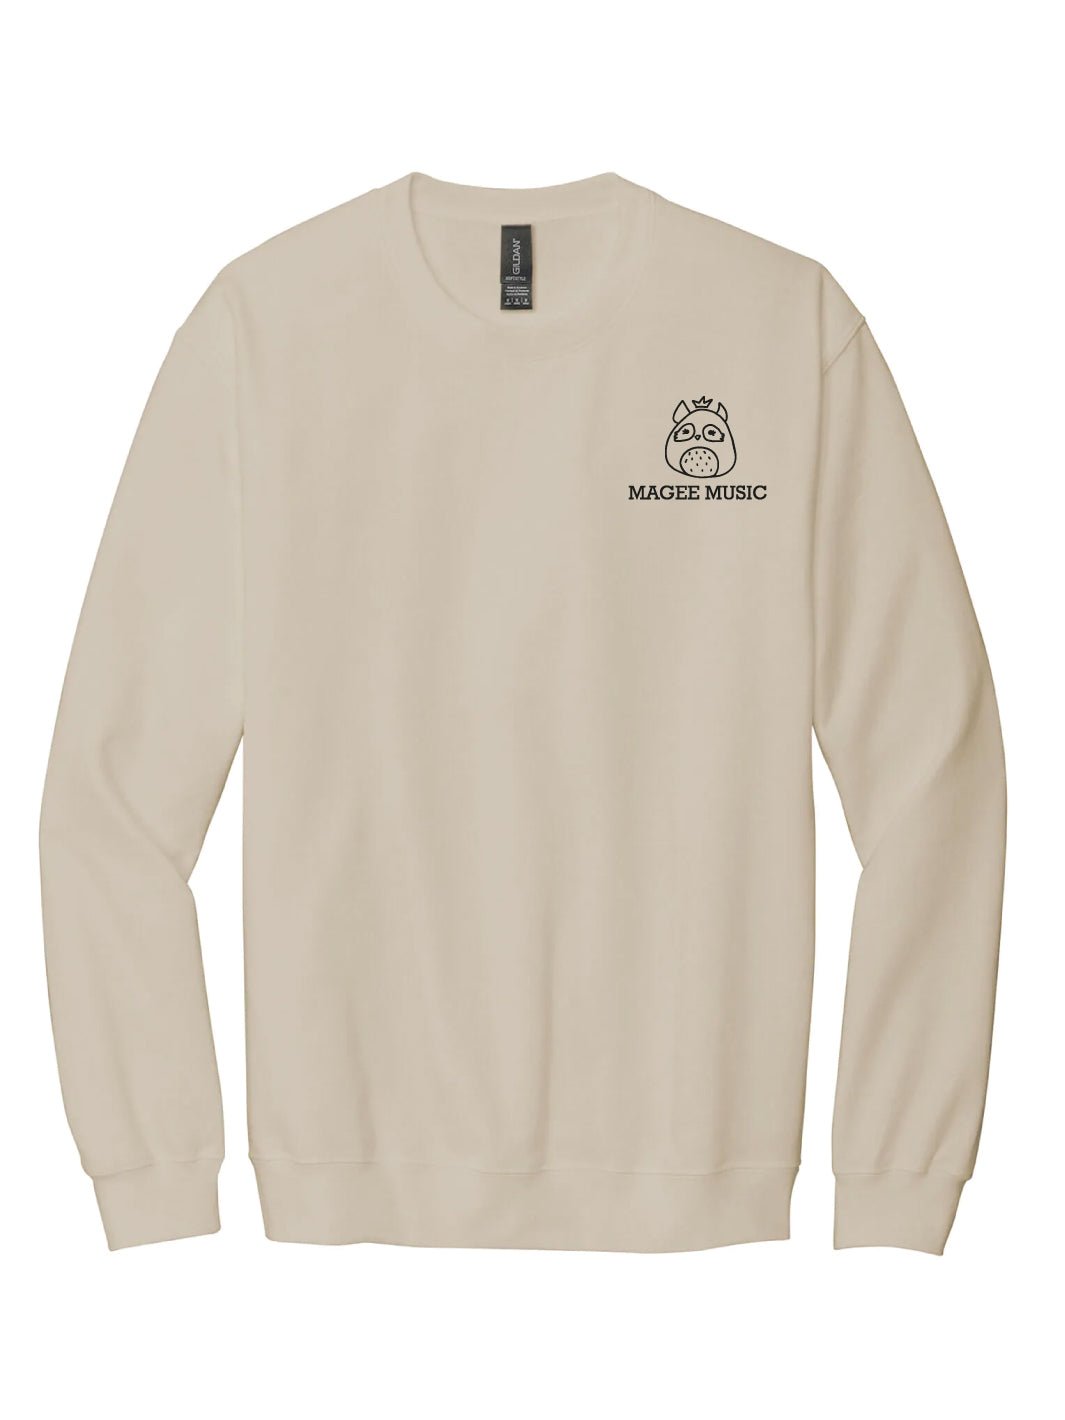 Magee Music Crewneck (Front and Back Designs) - Oddball Workshop